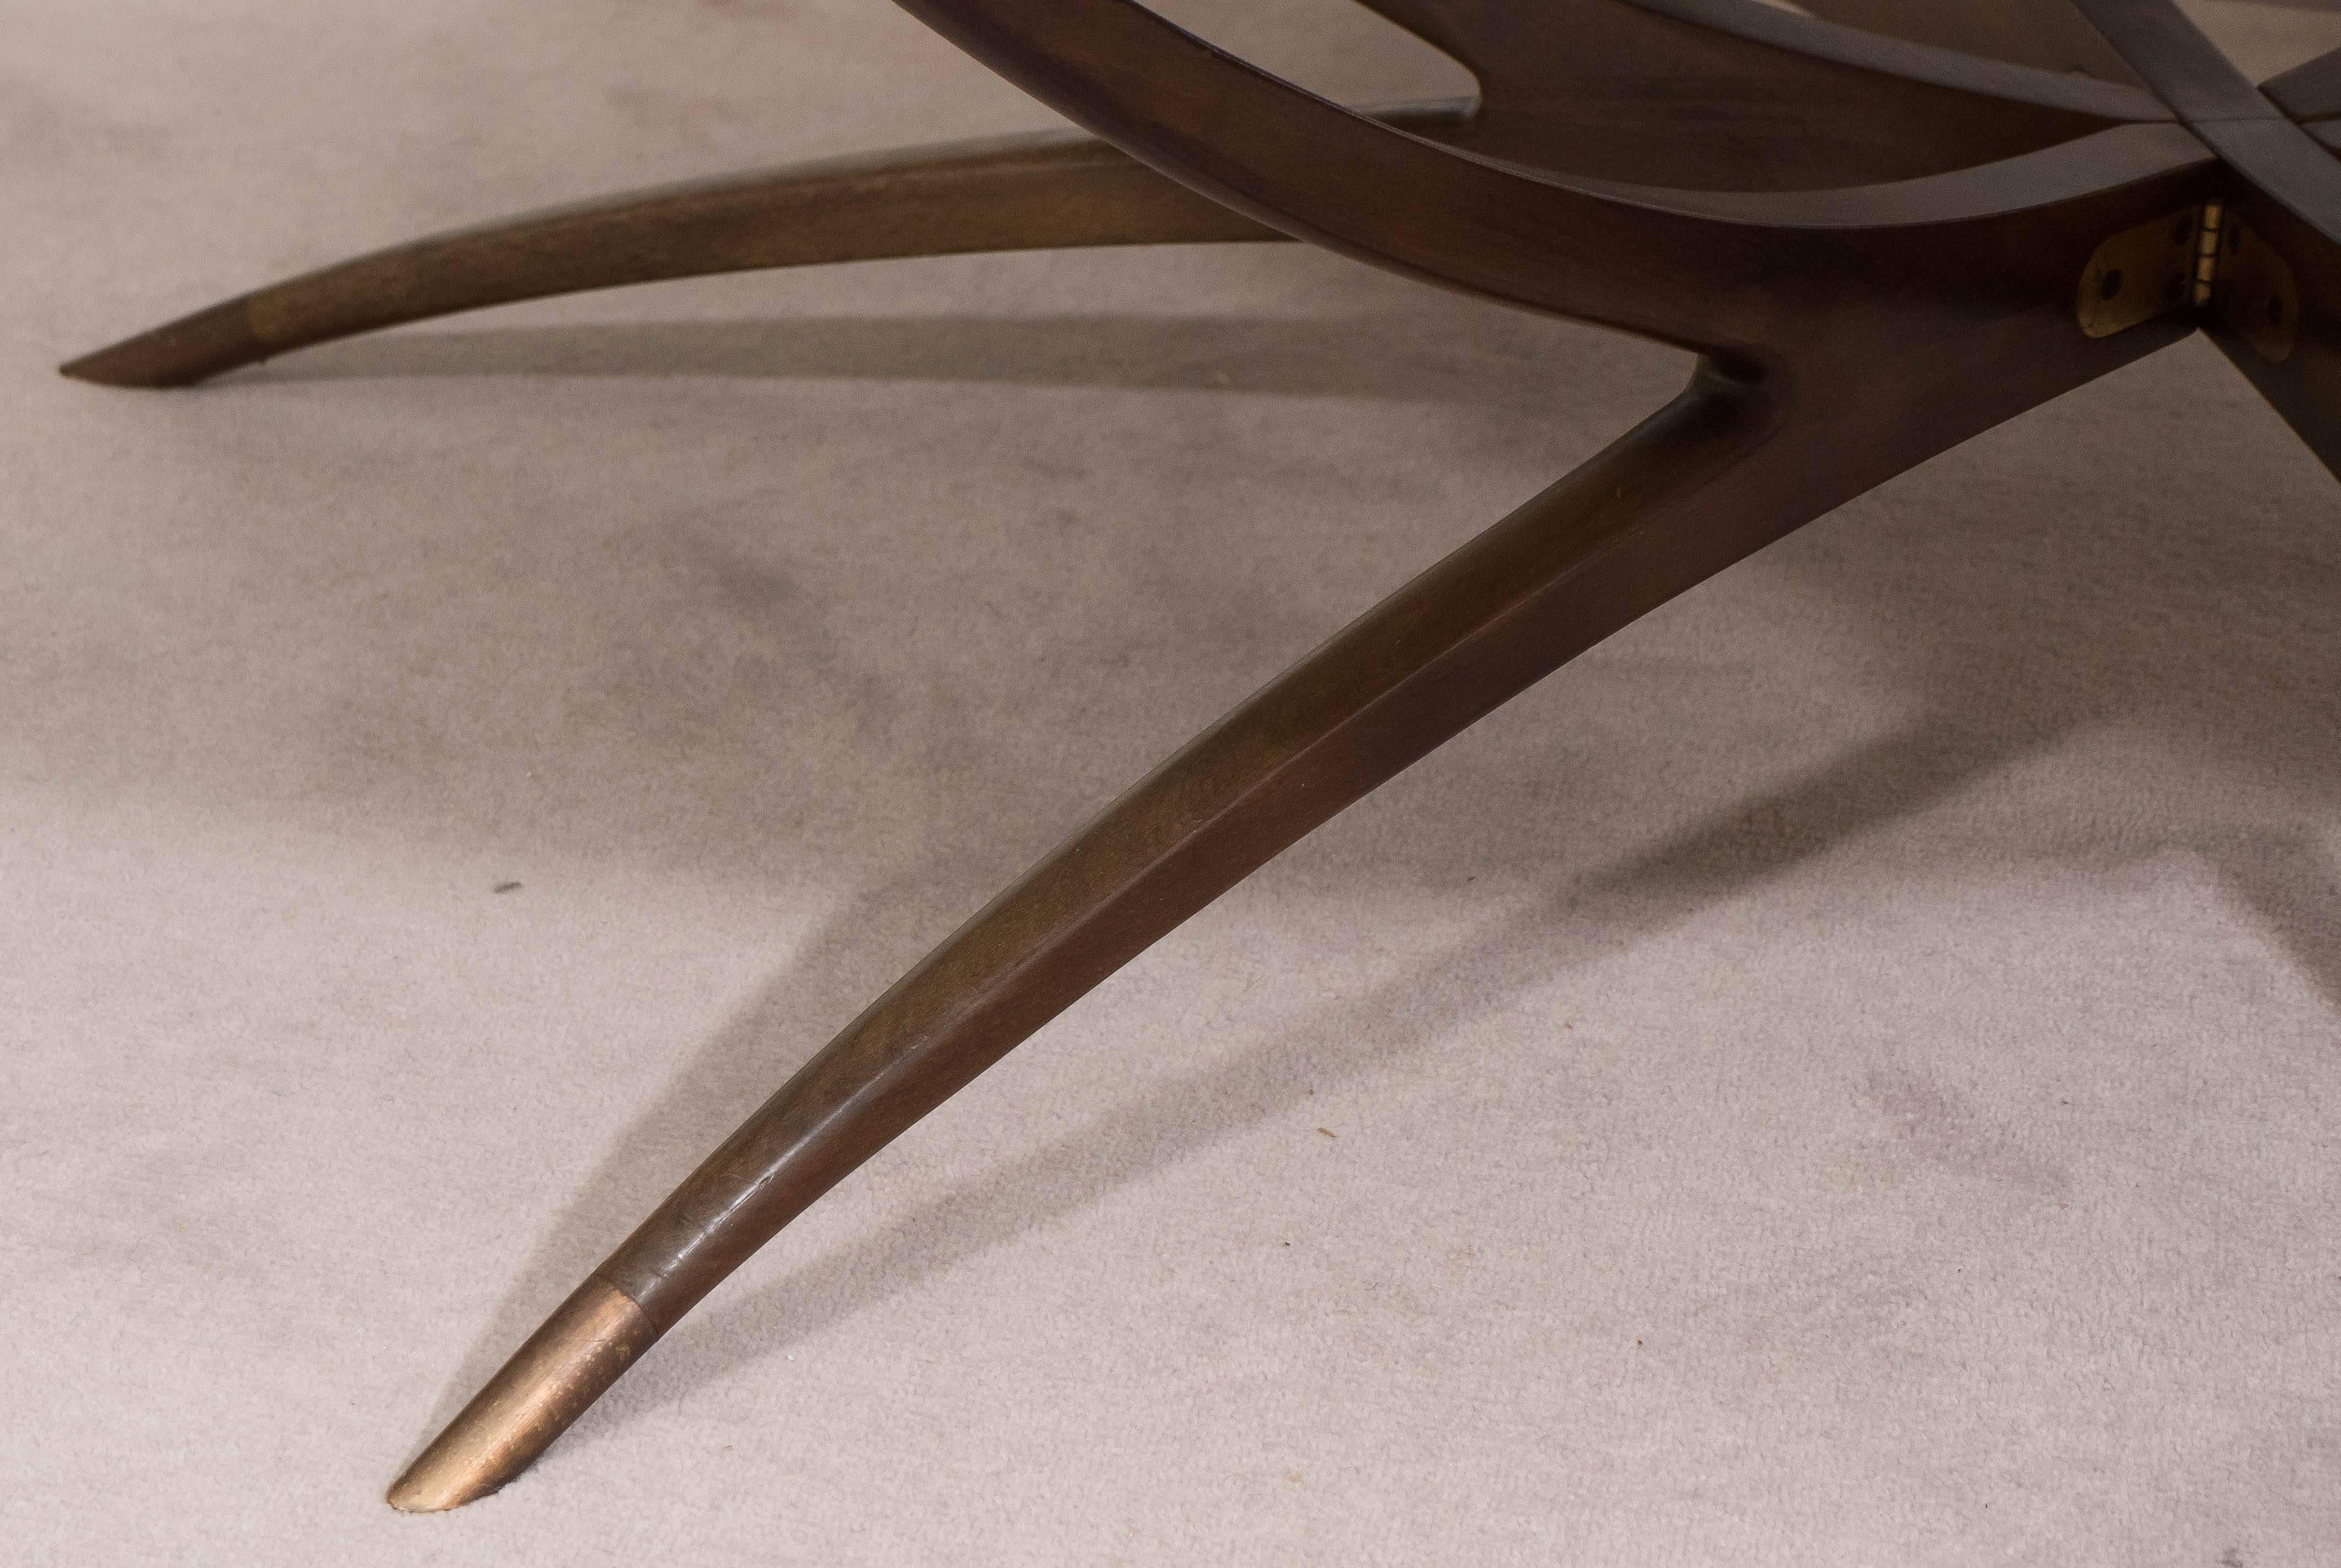 A coffee and cocktail table, produced late 1950s-early 1960s, with milk glass top, inset against a walnut frame, on elaborate spider leg base with brass sabots. This table remains in very good vintage condition, consistent with age and use.